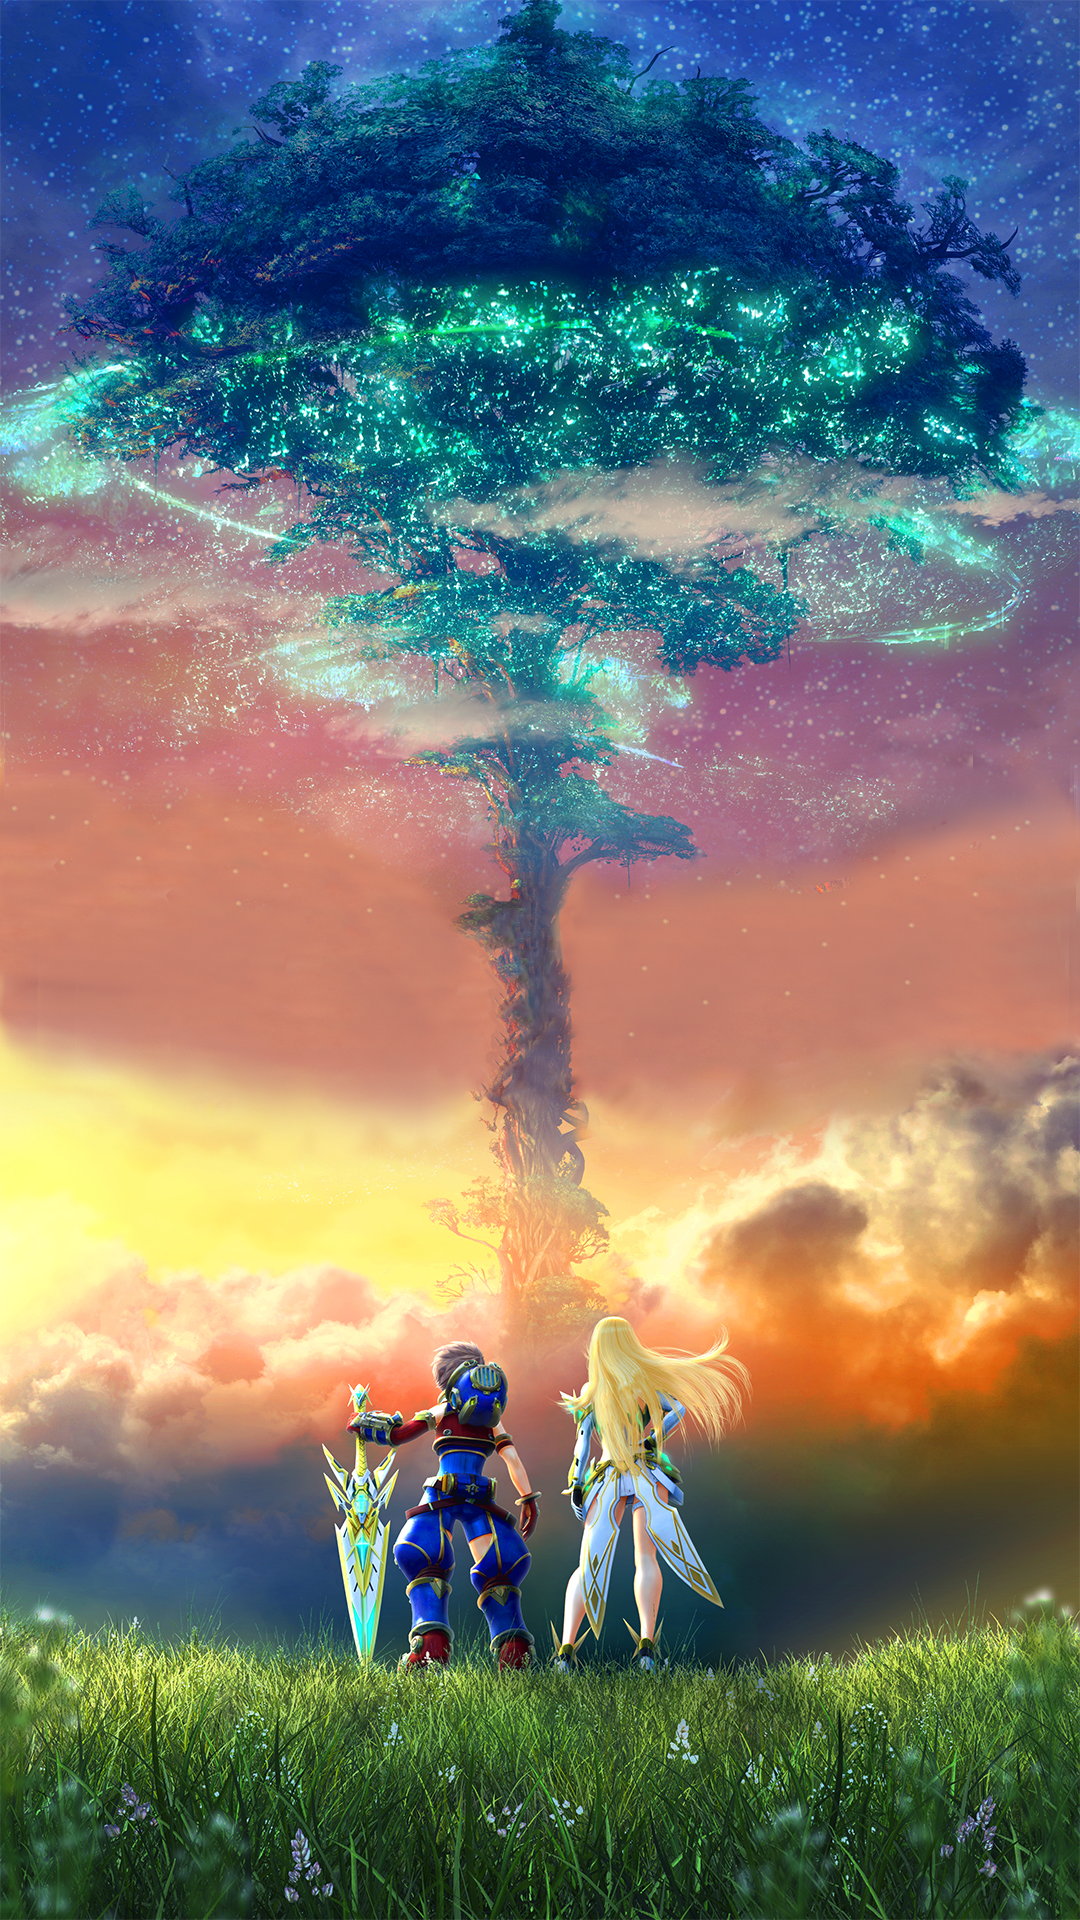 Official Xenoblade 2 Artwork Without The Text Xenobladechronicles